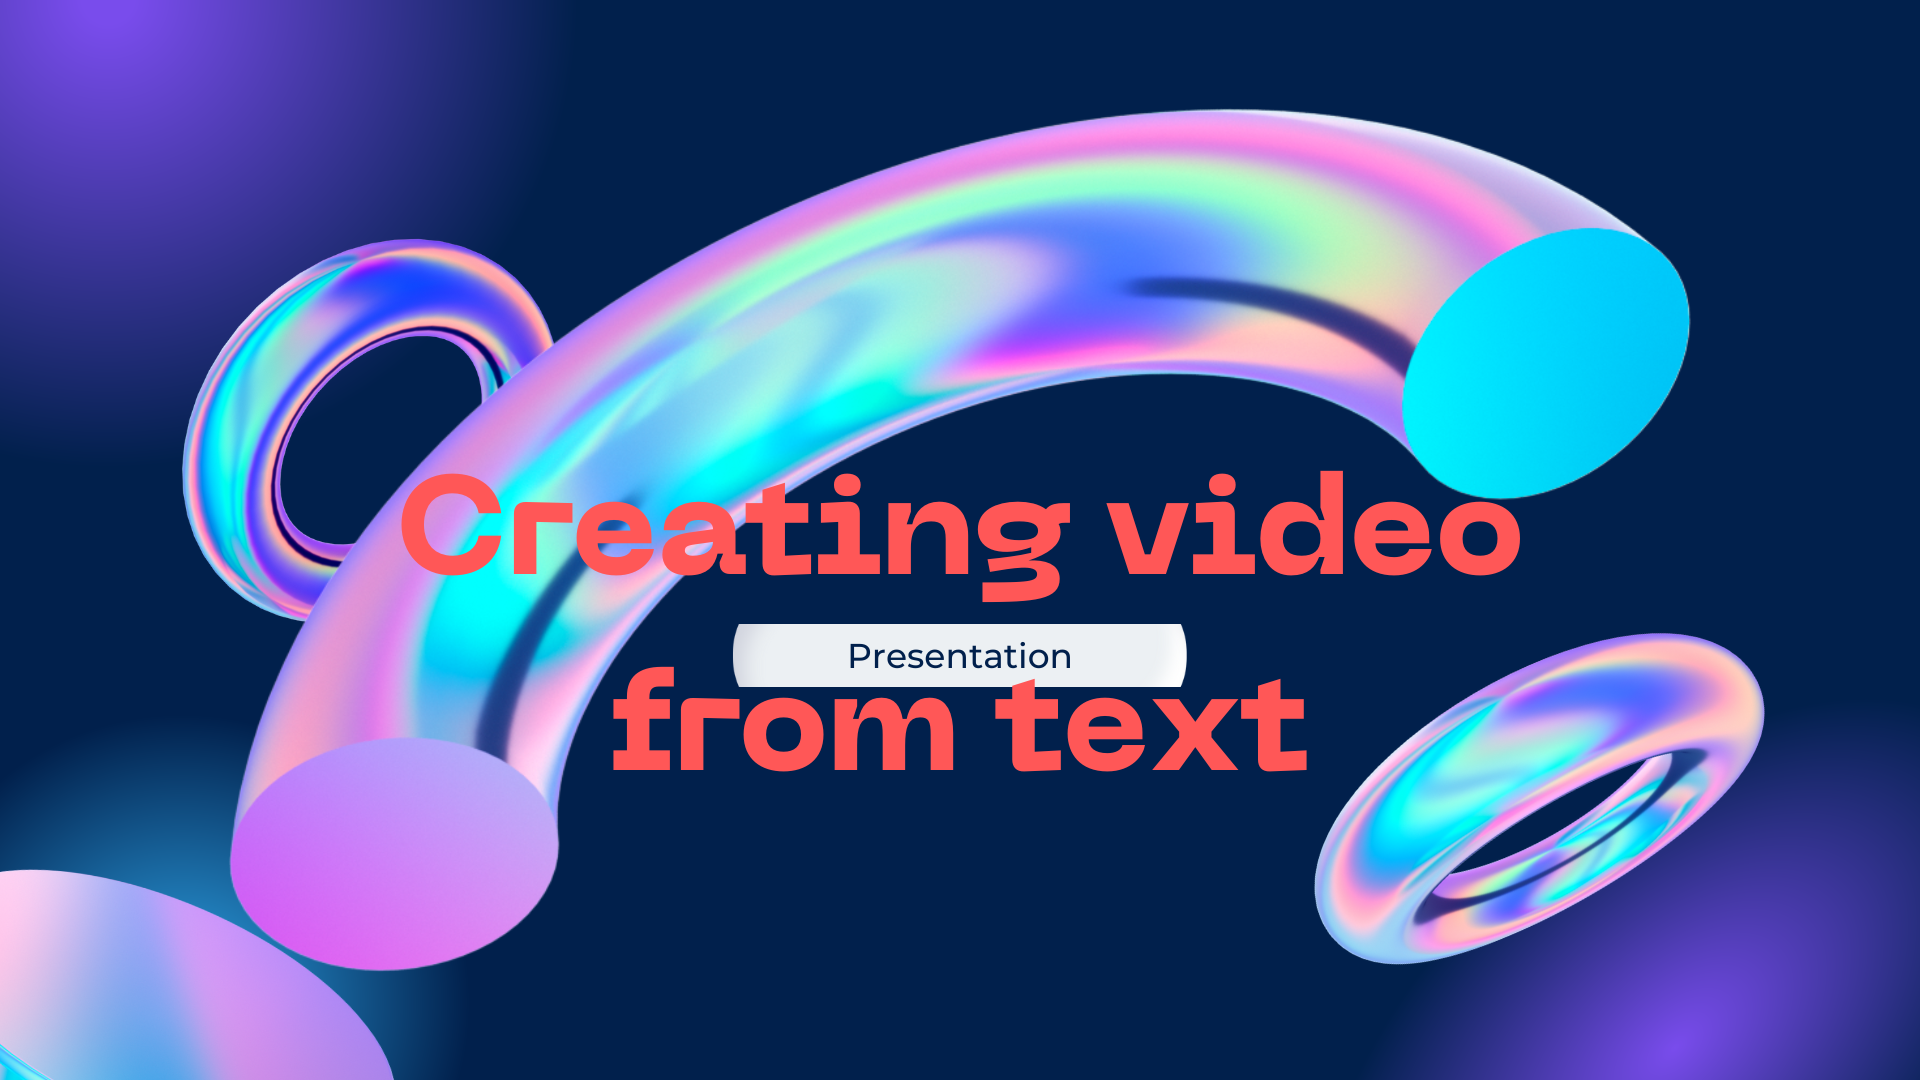 Creating video from text Sora is an AI model that can create realistic and imaginative scenes from text instructions.